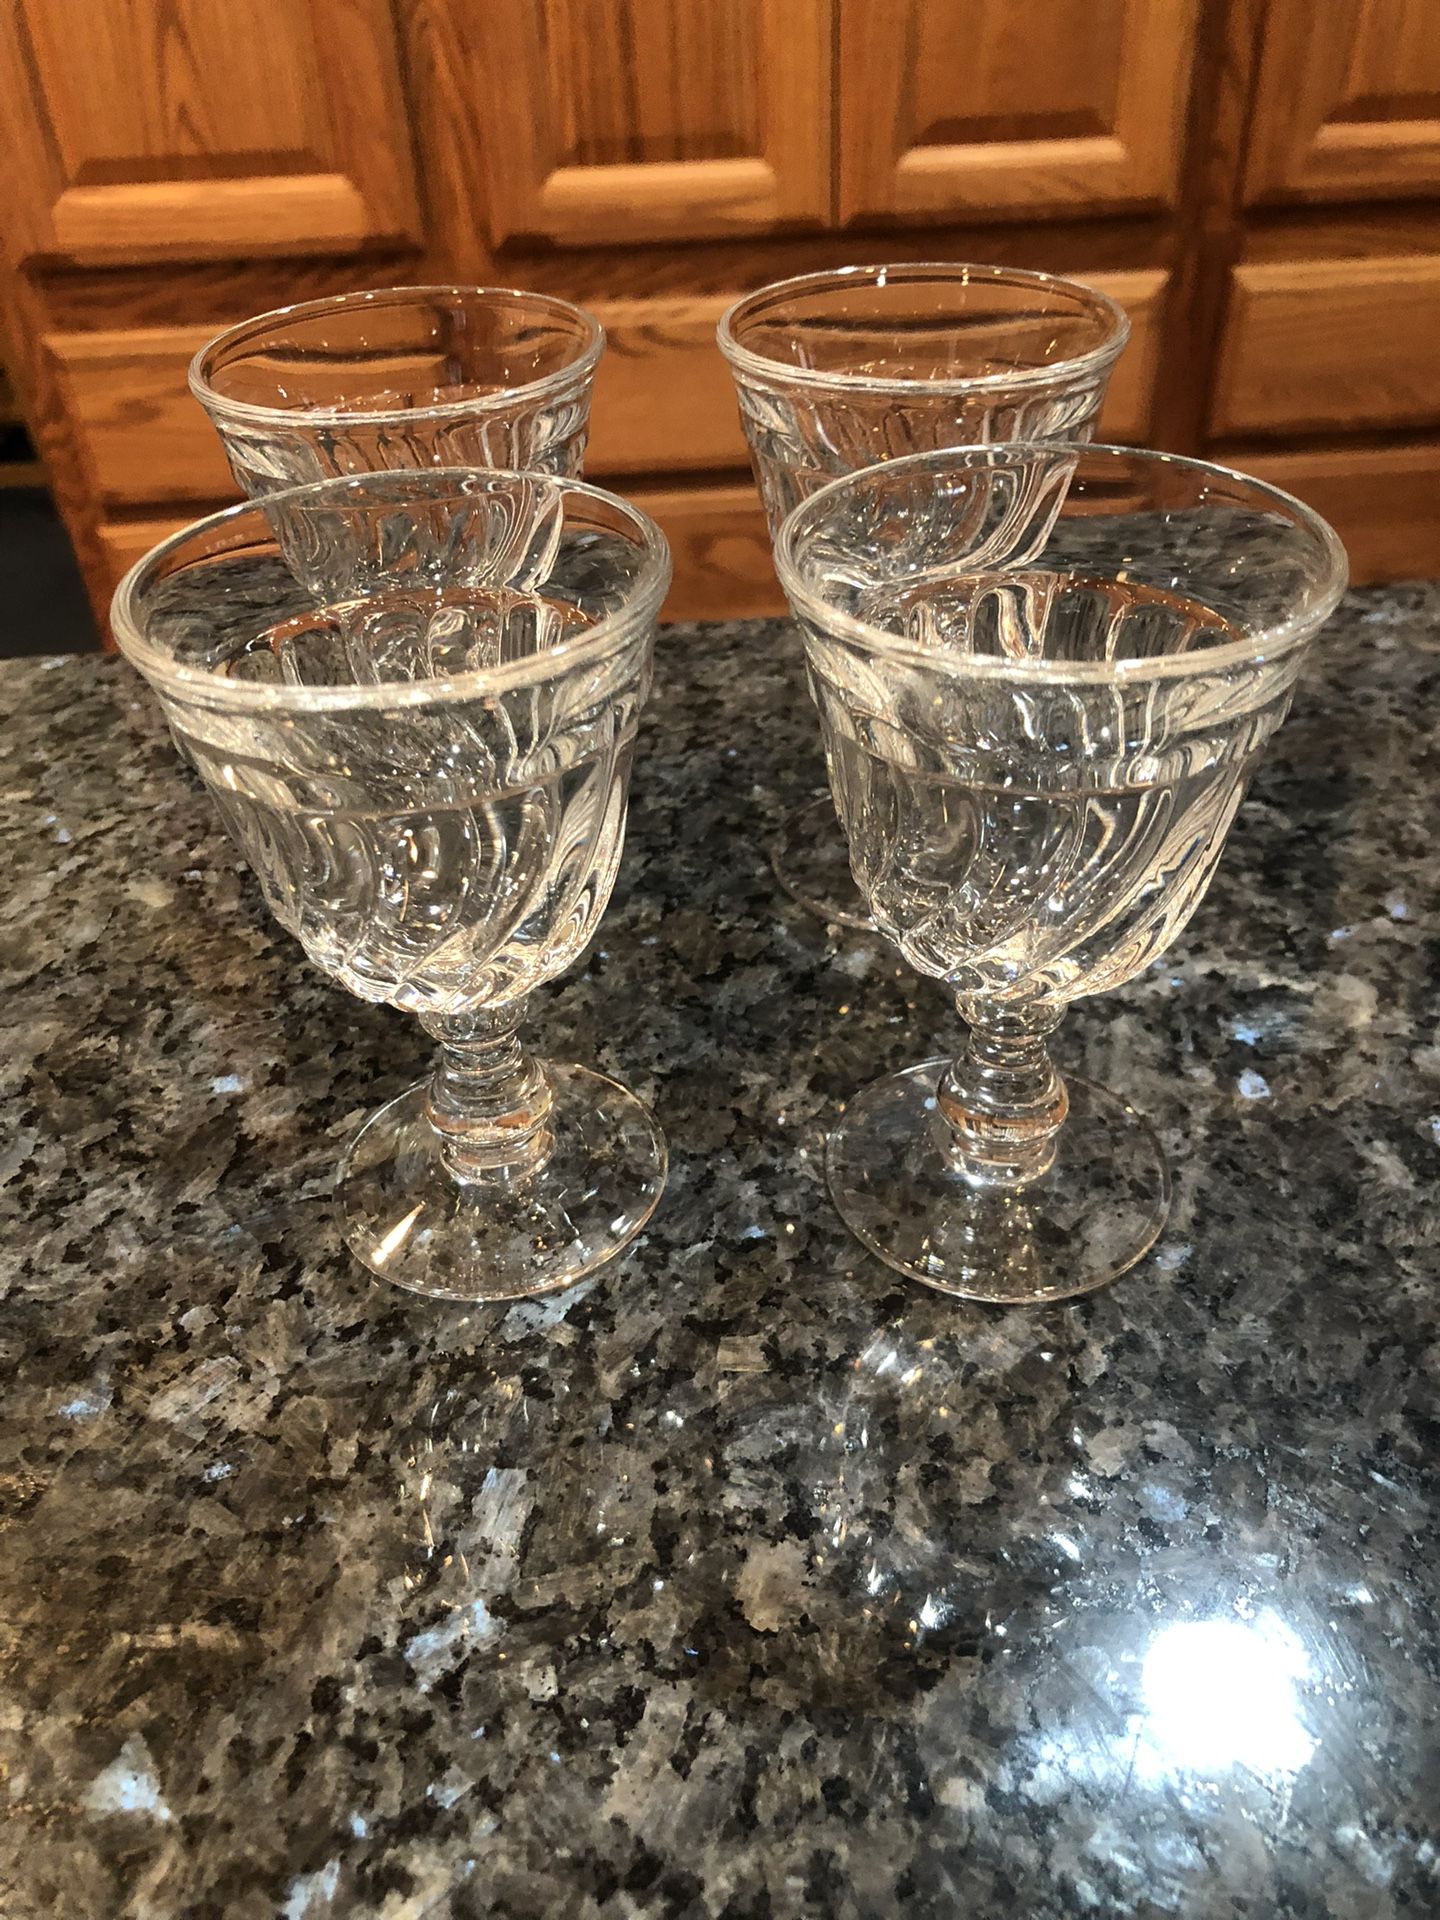  Vintage Fosteria Colony Crystal Clear Swirl Water Goblets Wine Glasses .  Set Of 4.  From The 1960’s.  Preowned Excellent Condition 